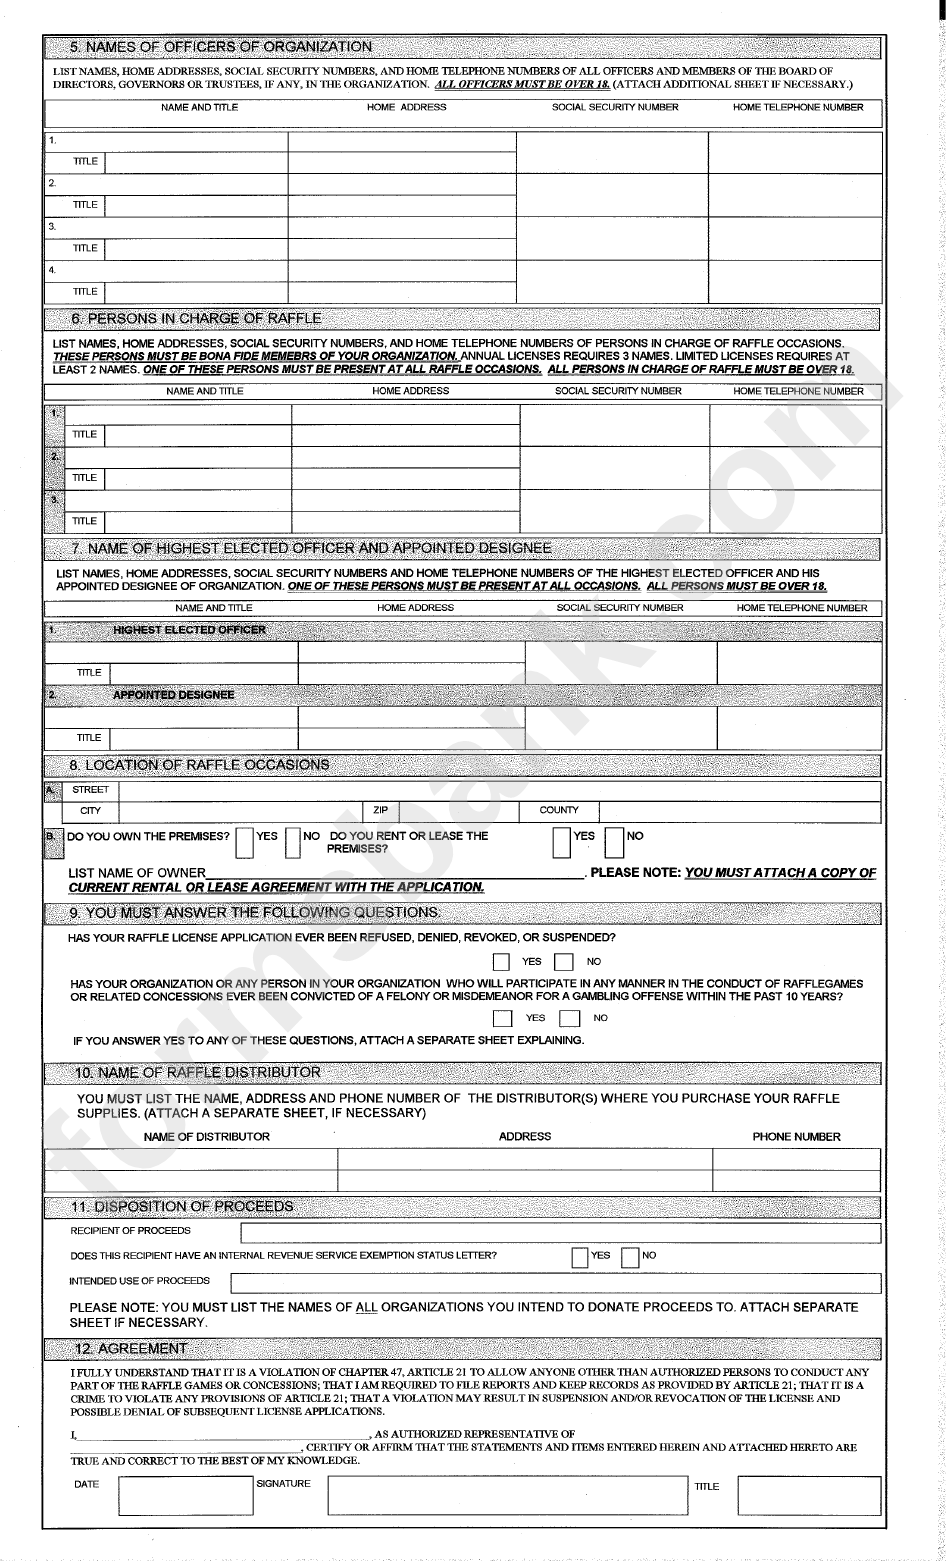 Form Raf-1 - Application Form For Annual, Limited, Exempt Or State Fair Raffle License